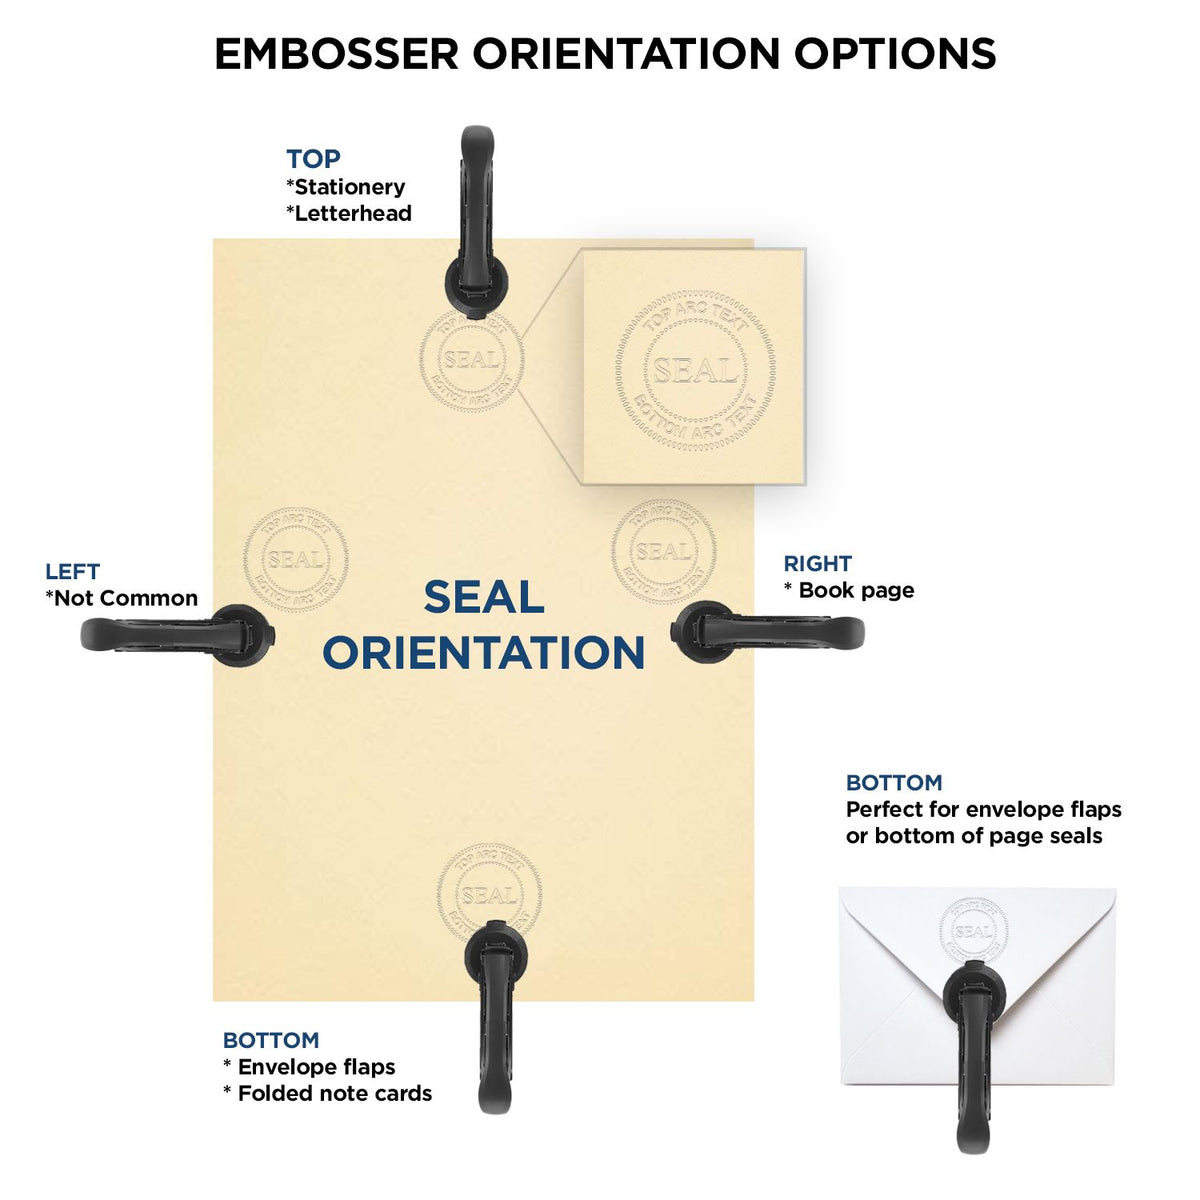 An infographic for the Heavy Duty Cast Iron Wyoming Architect Embosser showing embosser orientation, this is showing examples of a top, bottom, right and left insert.